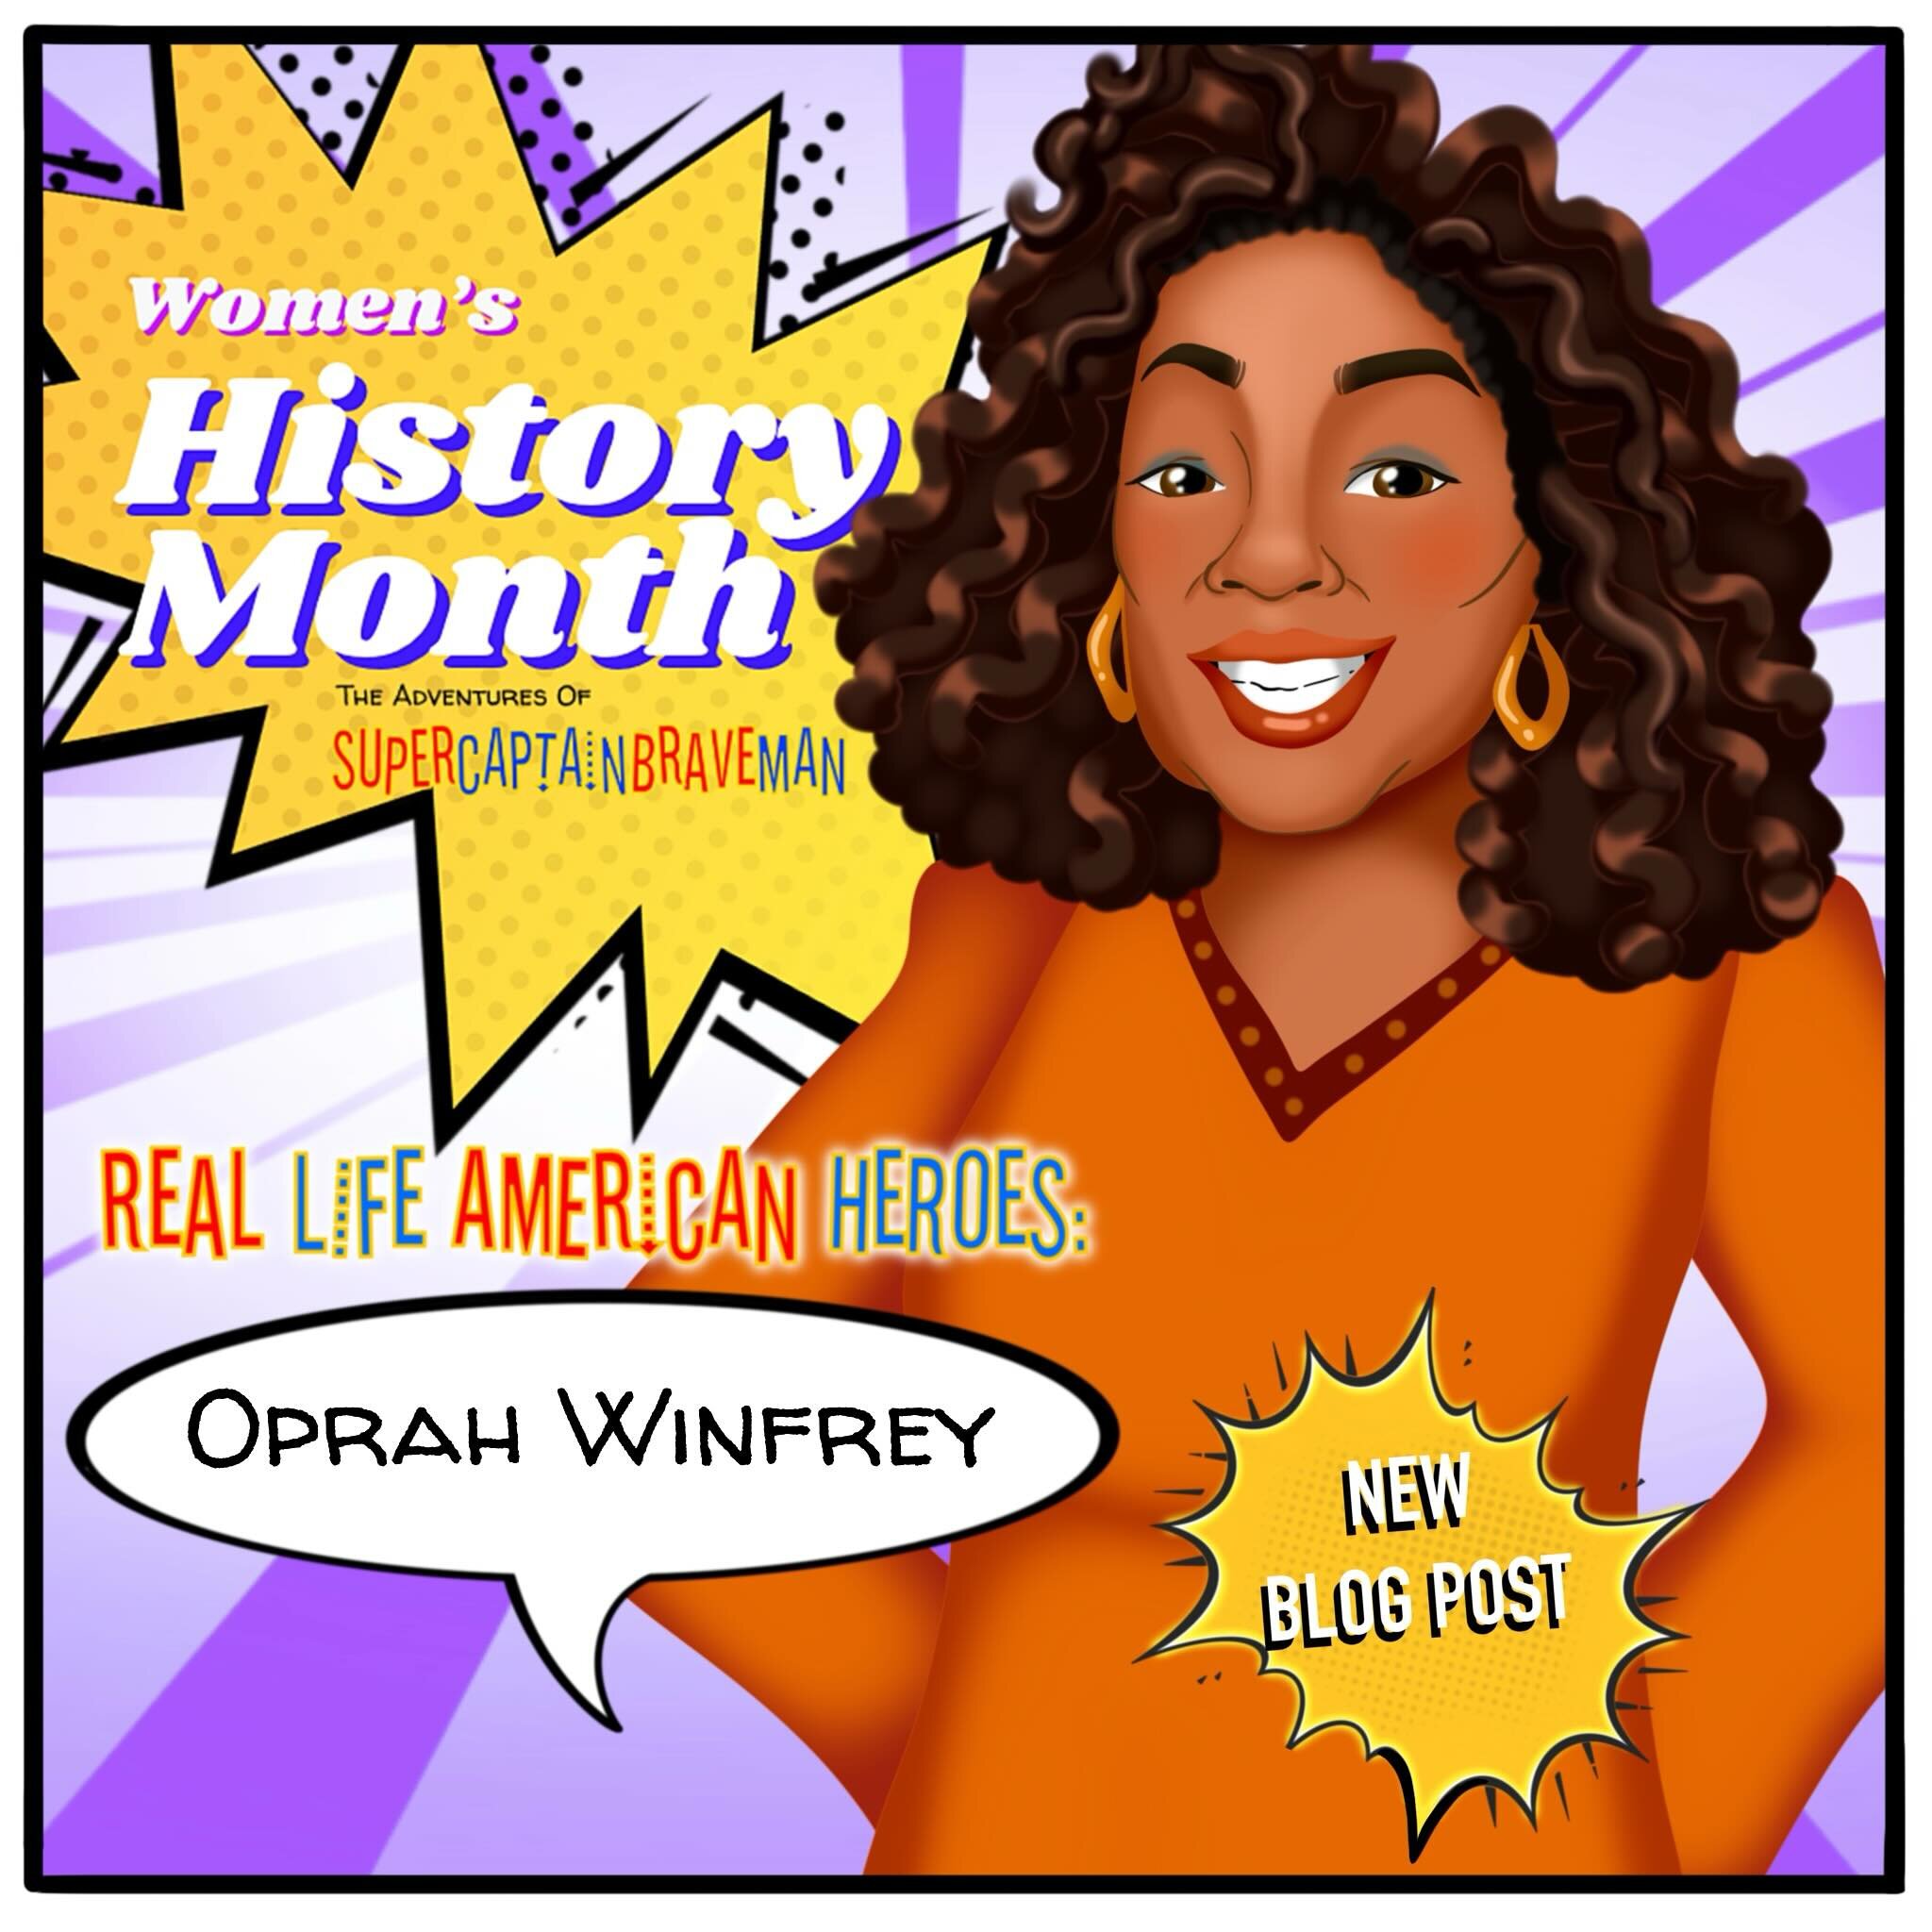 It&rsquo;s International Women&rsquo;s Day! What a great way to kick off the weekend!

Join us on our SuperCaptainBraveMan Super Blog to read about our first Real Life American Hero: Women&rsquo;s History Month blog for March! It&rsquo;s all about Op